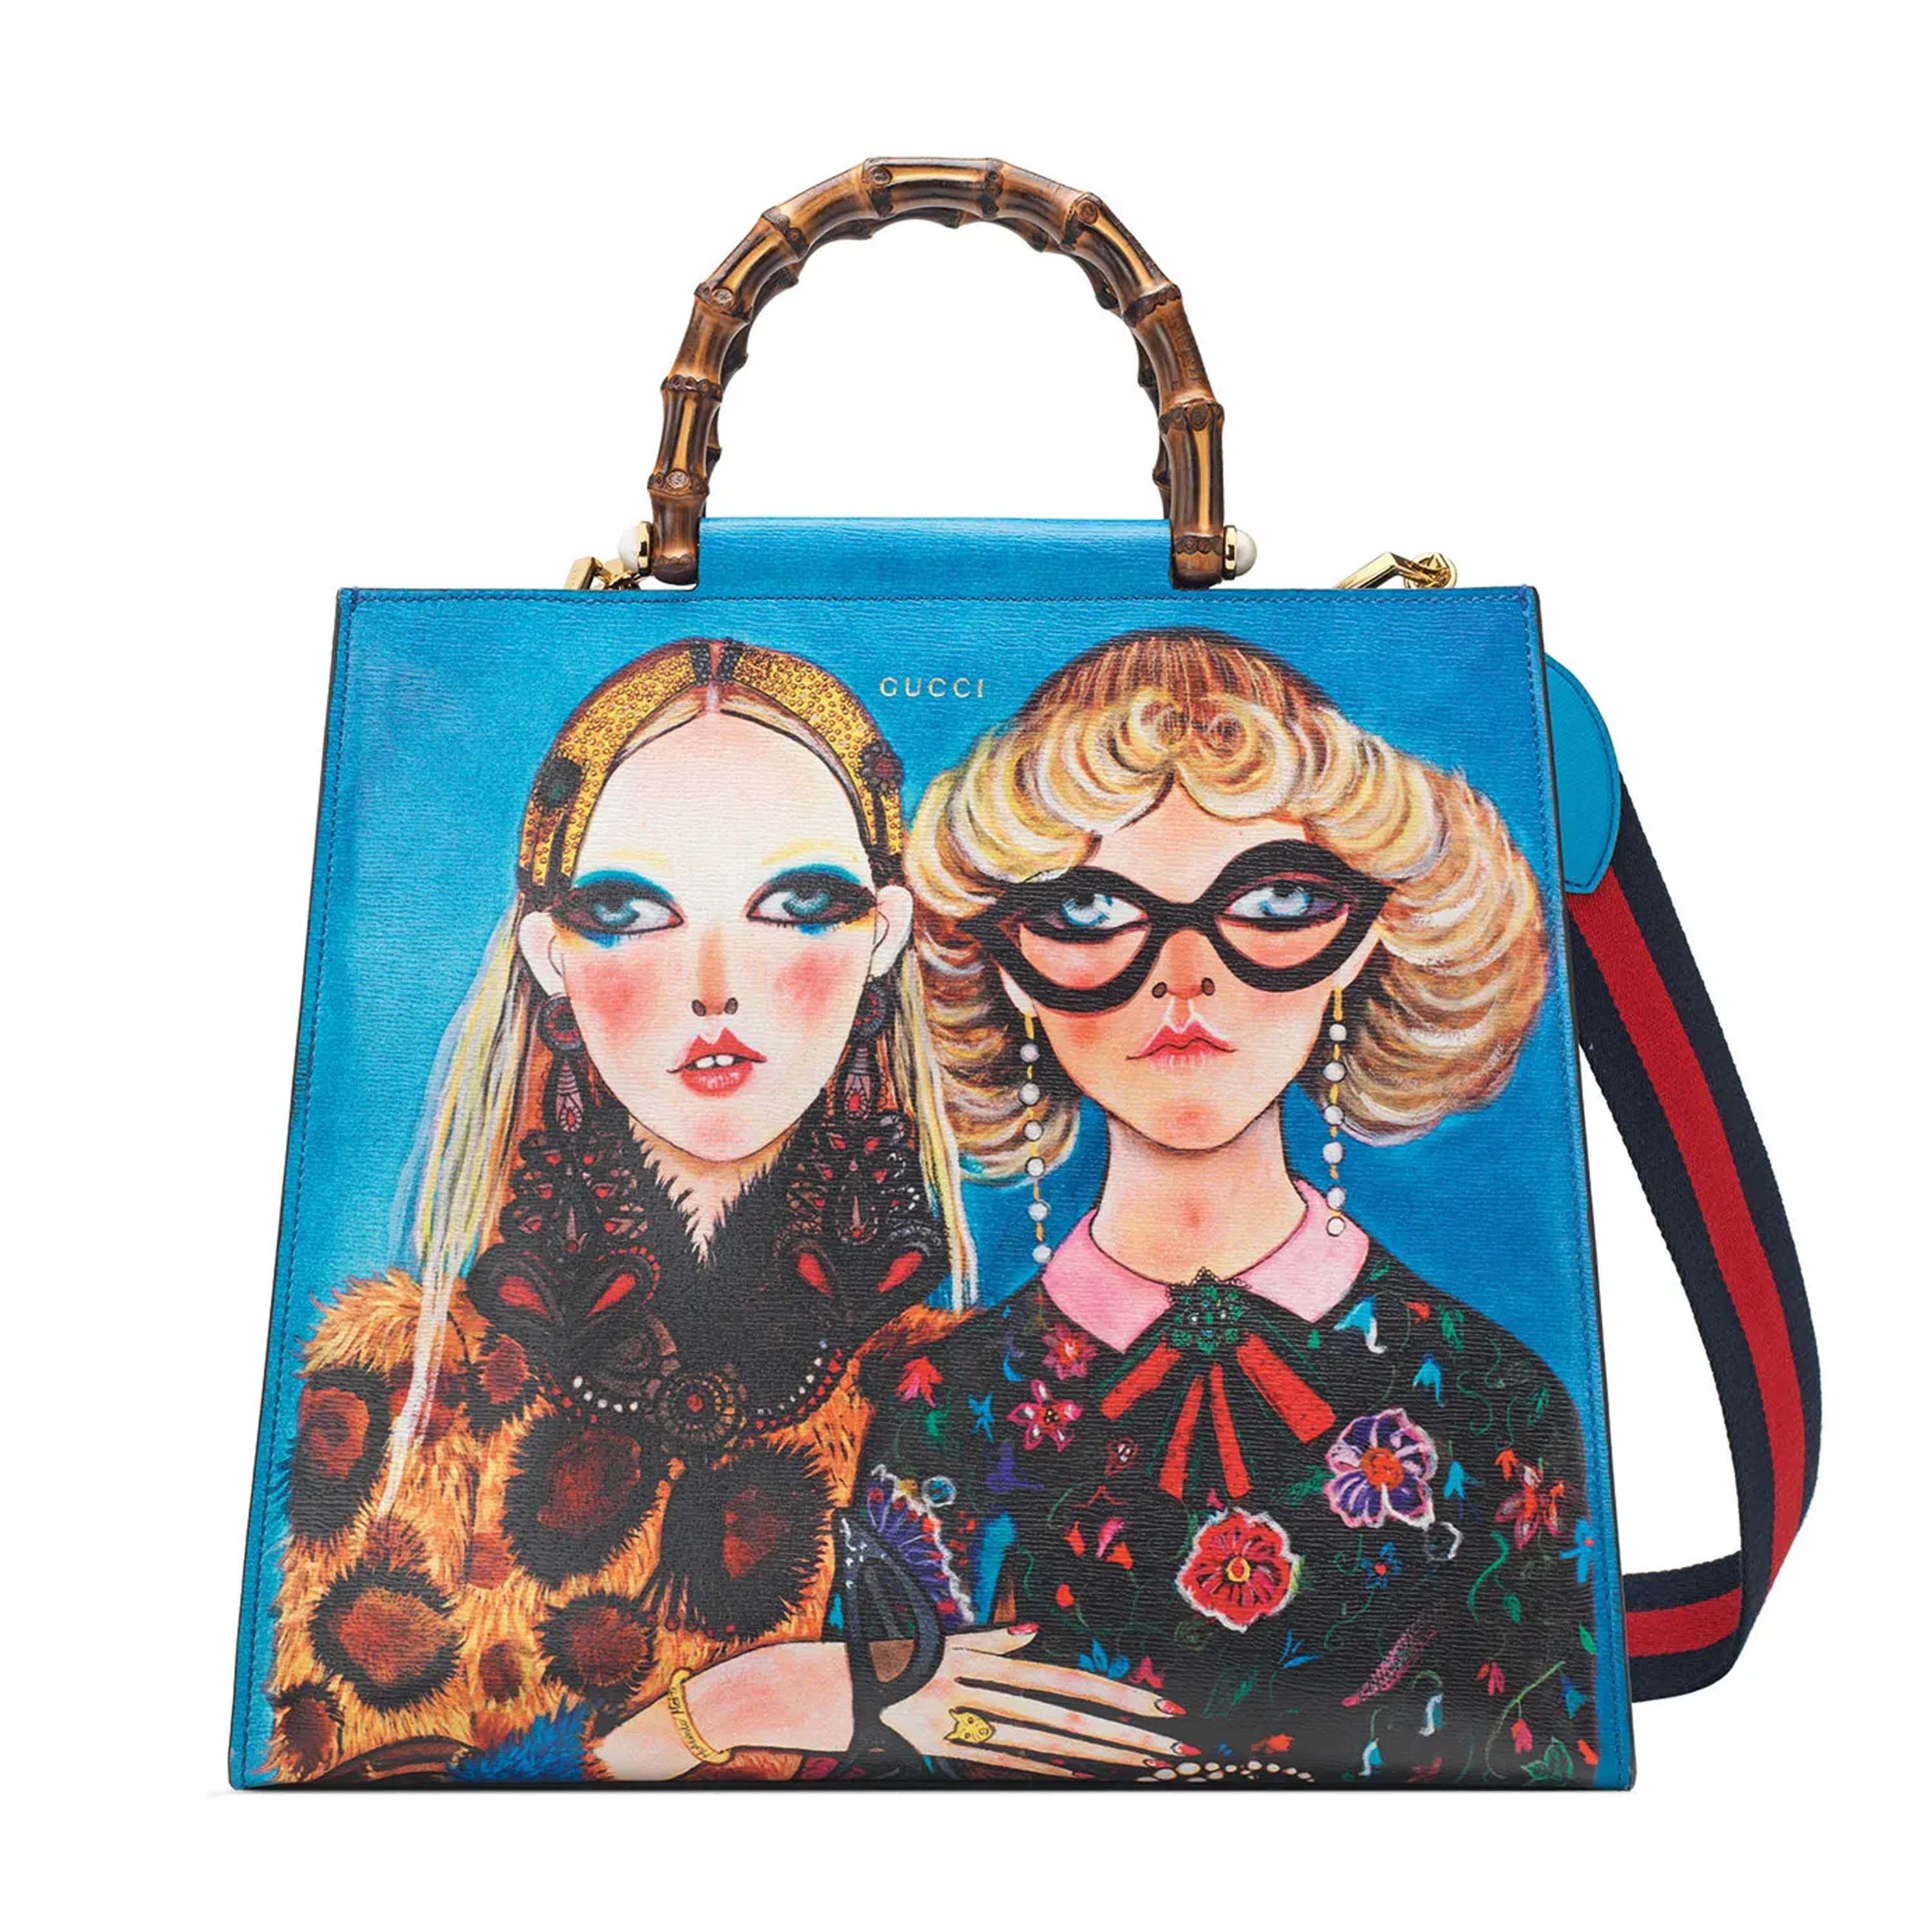 The Art of Luxury Handbags: Top 10 Iconic Bag Collaborations of